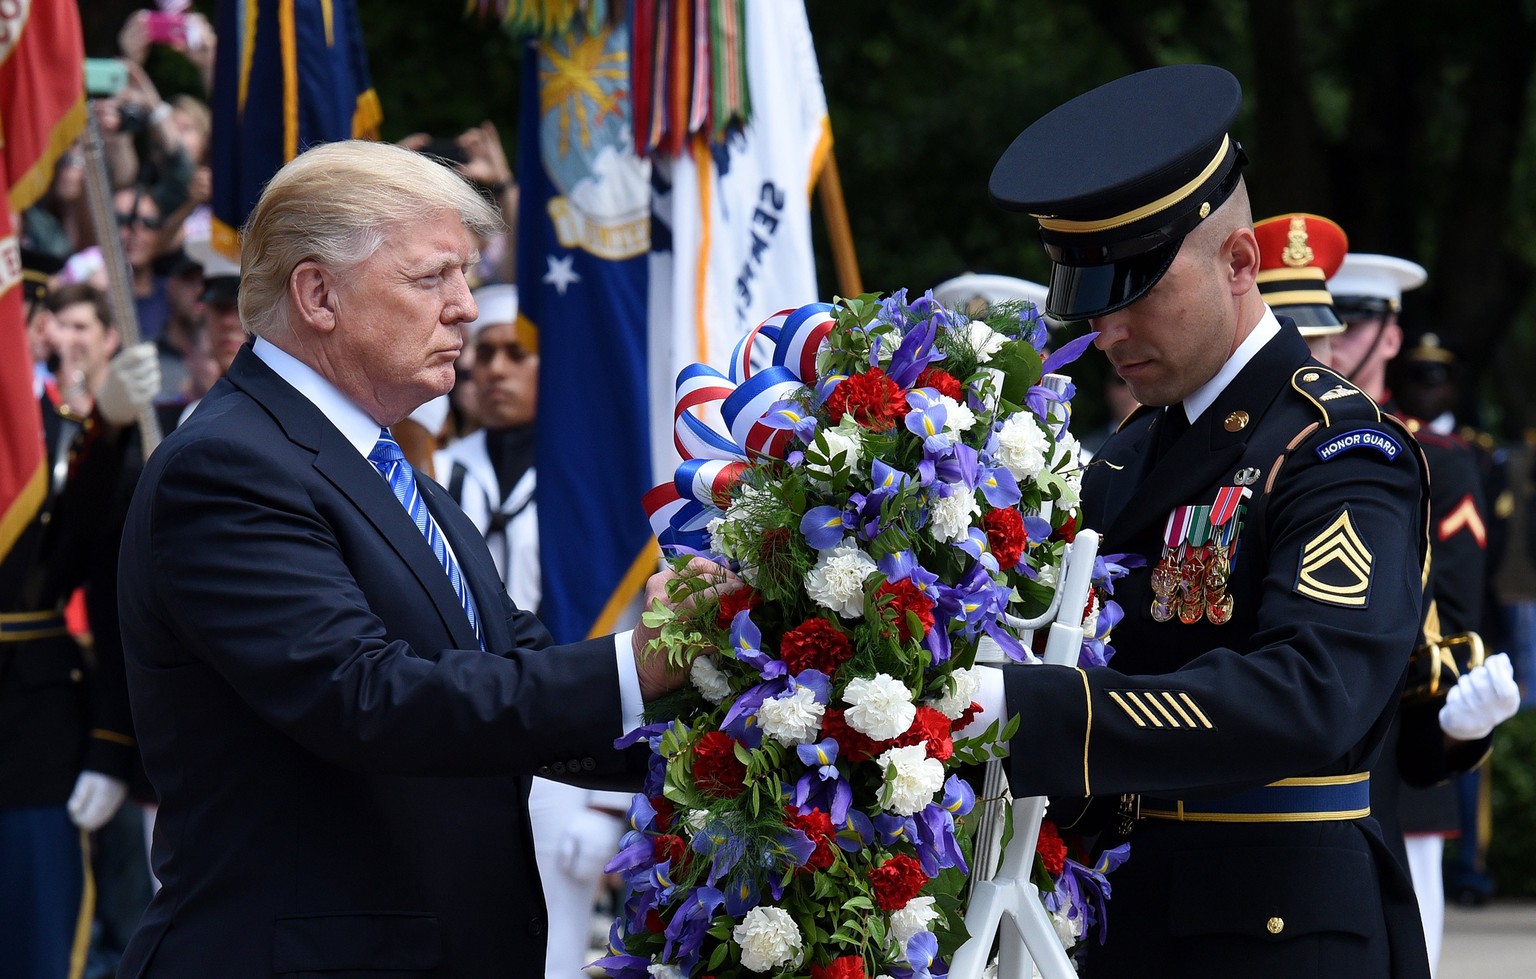 epa05997956 US President Donald J. Trump participates in a wreath-laying ceremony at the Tomb of the Unknown Soldier at Arlington National Cemetery on Memorial Day, in Arlington, Virginia, USA, 29 May ...